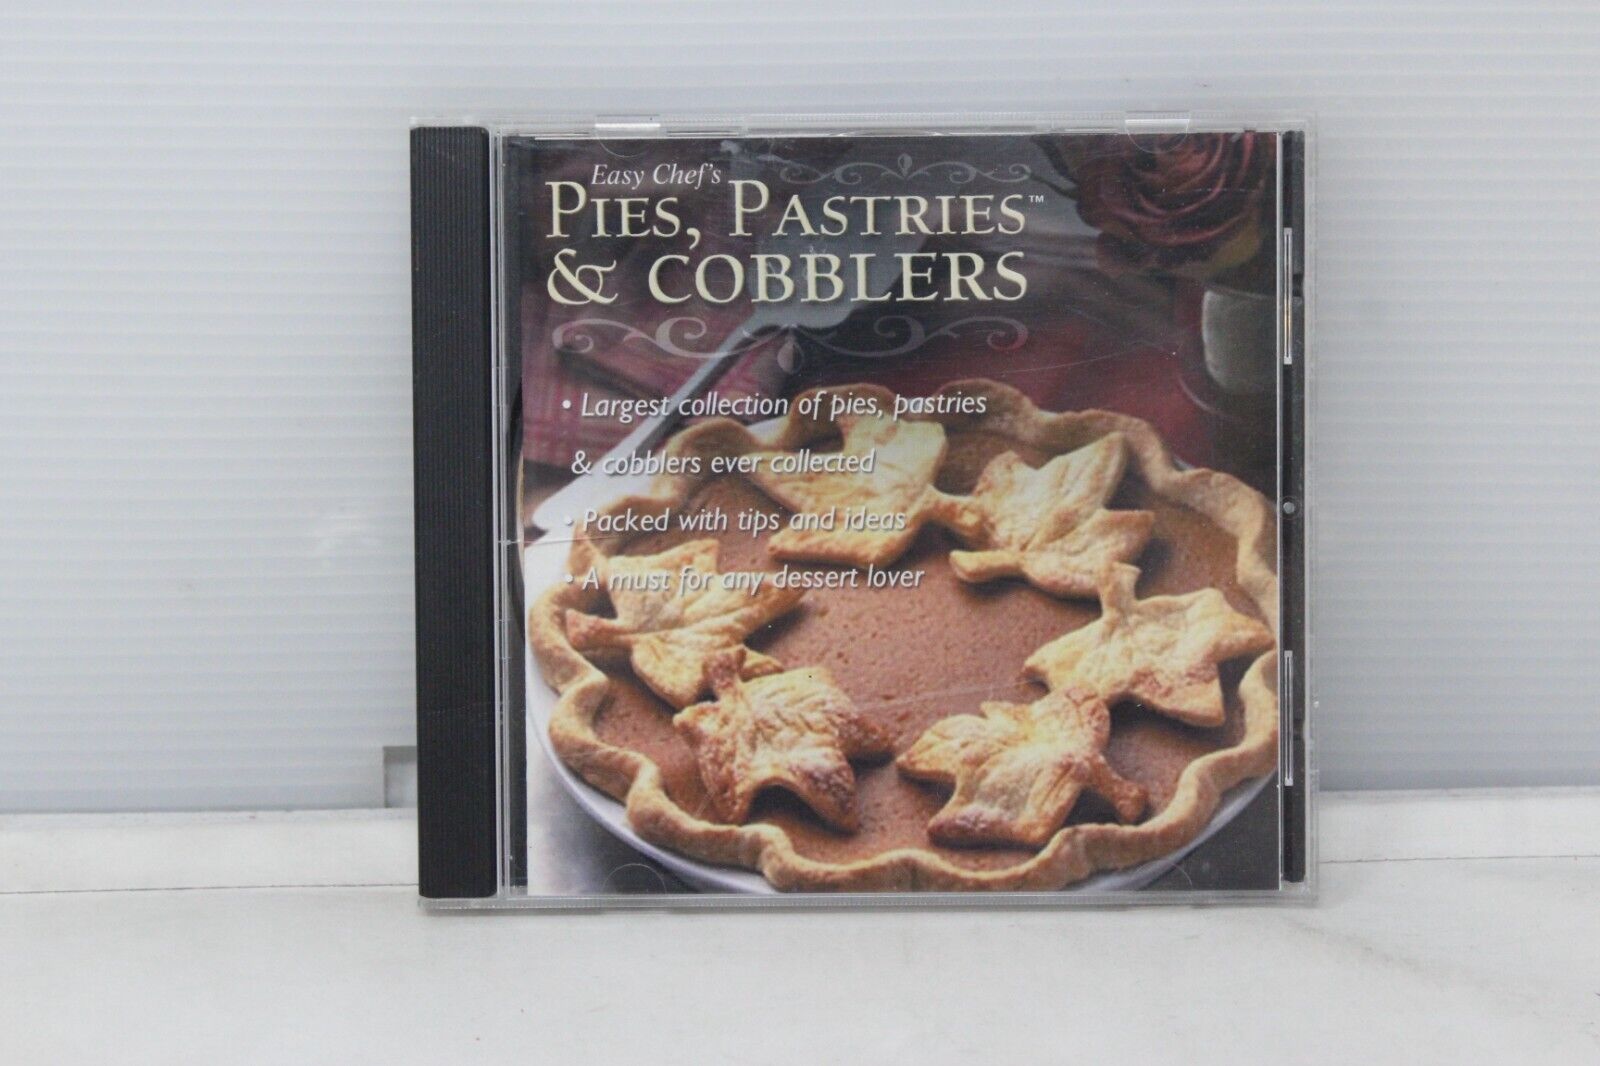 Easy Chef's: Pies, Pastries & Cobblers (PC CD-ROM) - Used